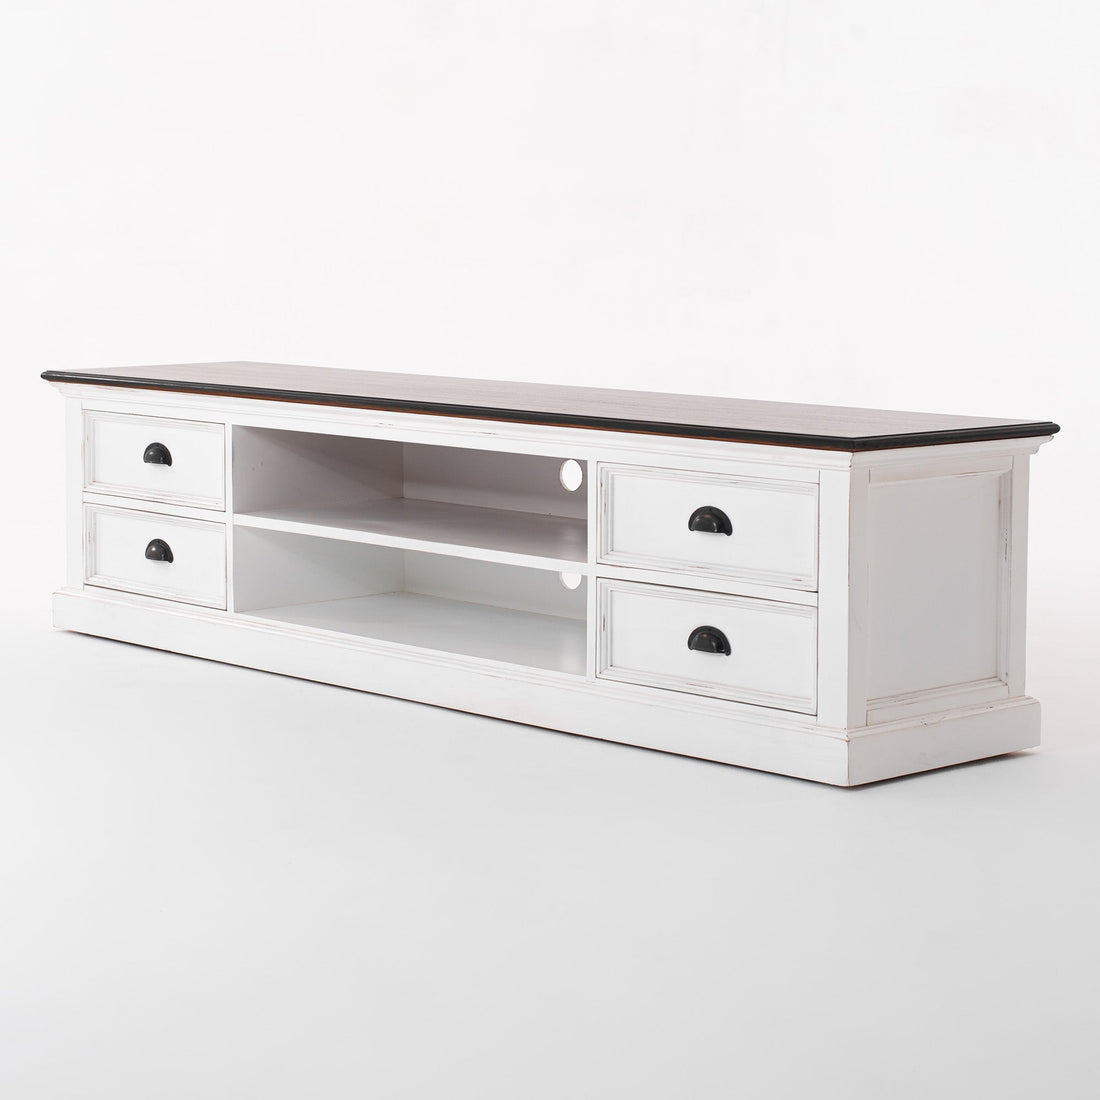 Halifax accent TV table with 4 drawers